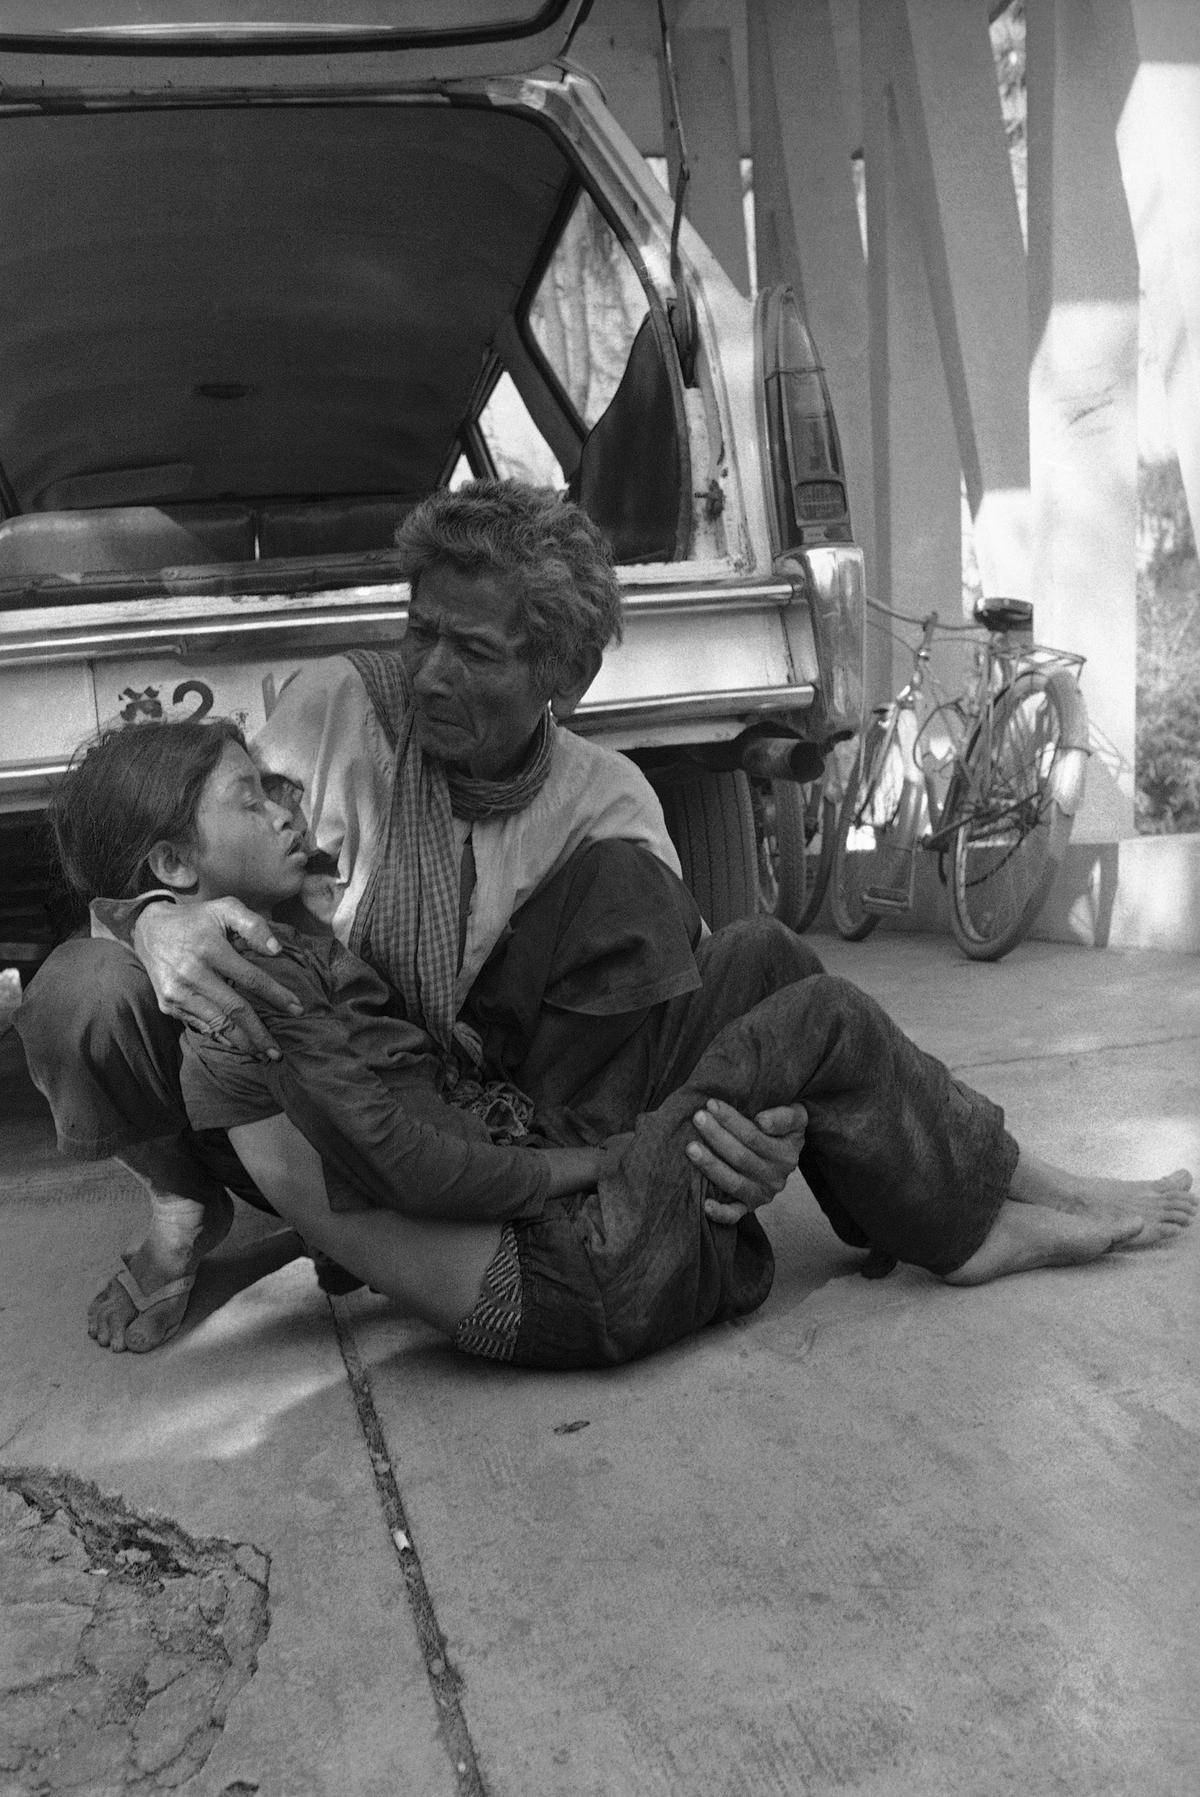 A Cambodian cries as he holds his dead daughter killed when Khmer Rouge insurgents shelled Prek Phnau, north of Phnom Penh, Cambodia, in 1974. (AP Photo/Chor Yuthy)